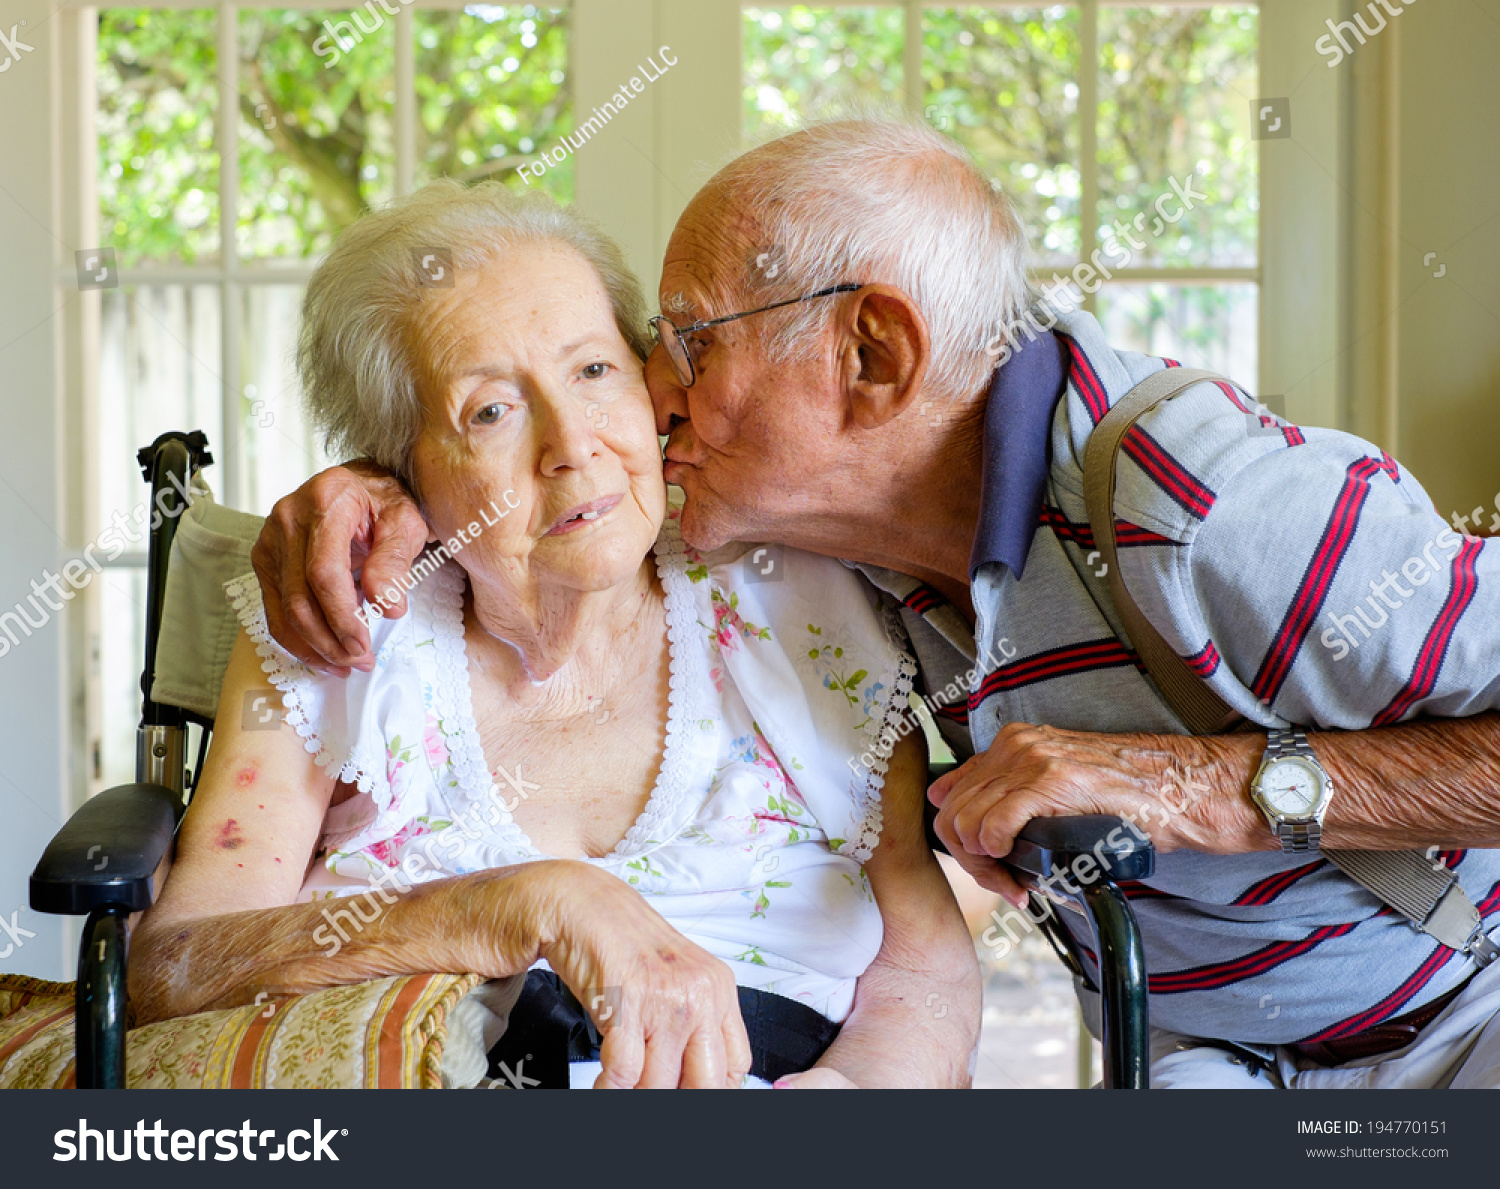 Elderly eighty plus year old woman in a wheel chair in a home setting with her husband. #194770151